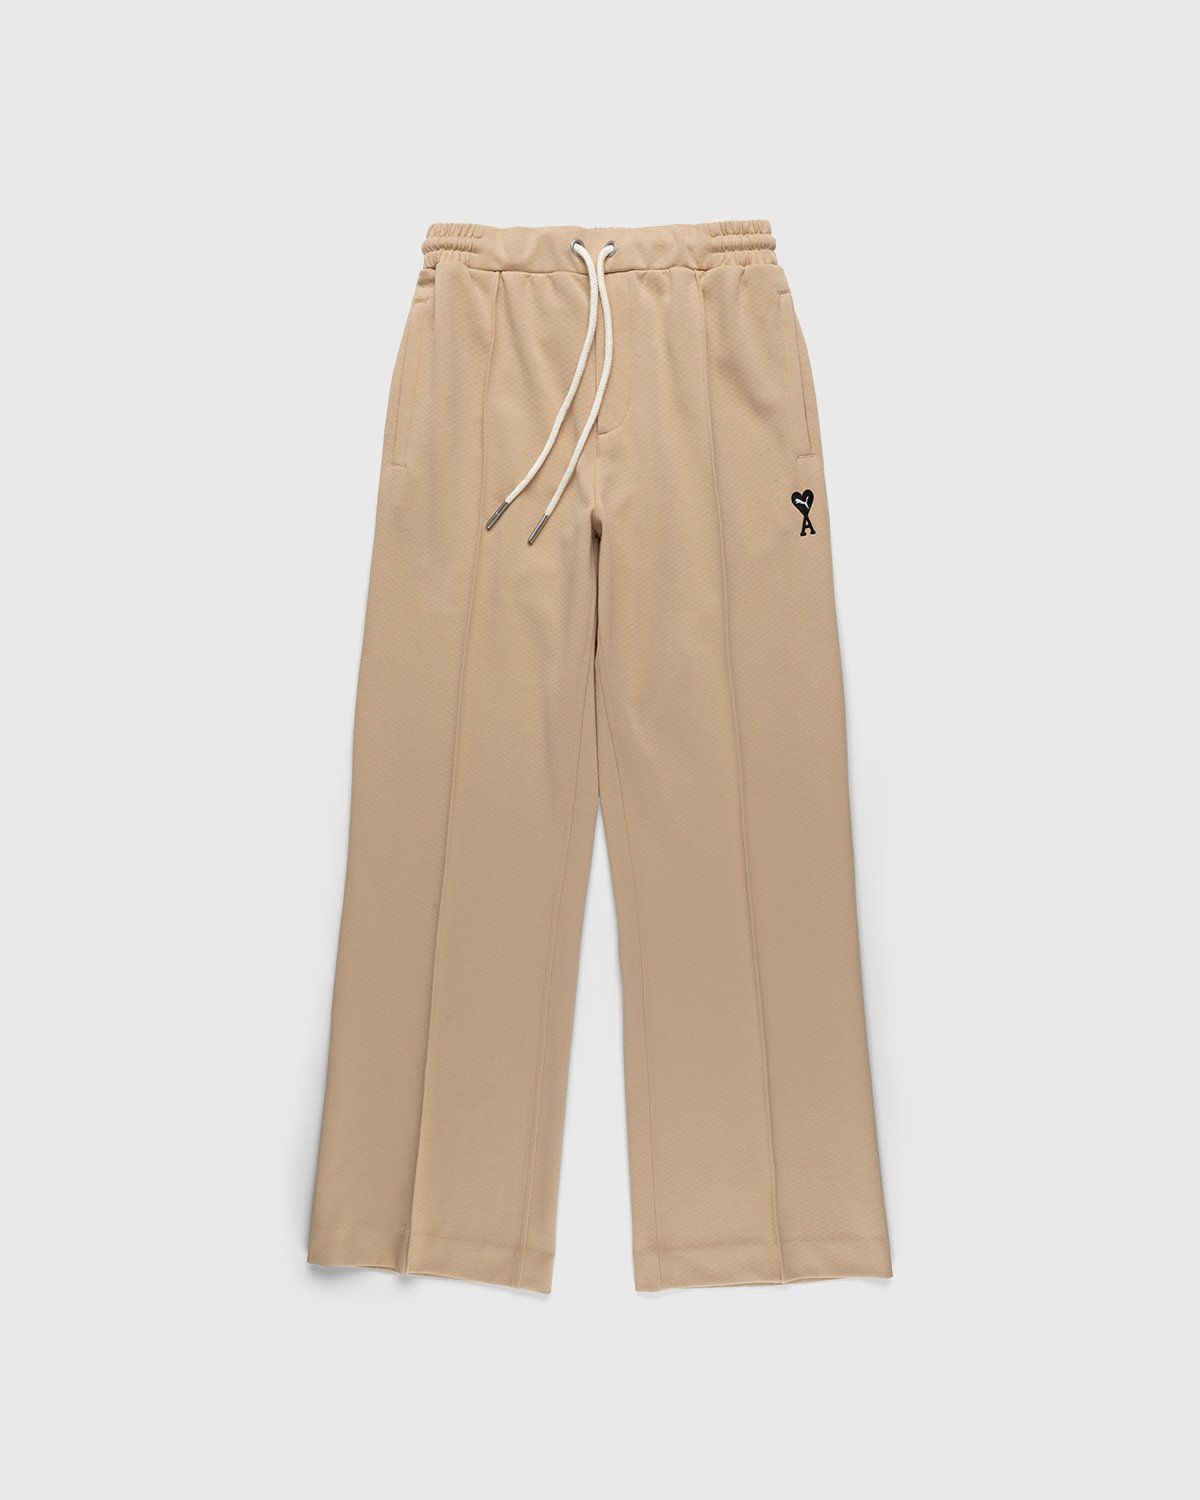 Puma x AMI – Wide Logo Pants Ginger Root - Trousers - Beige - Image 1